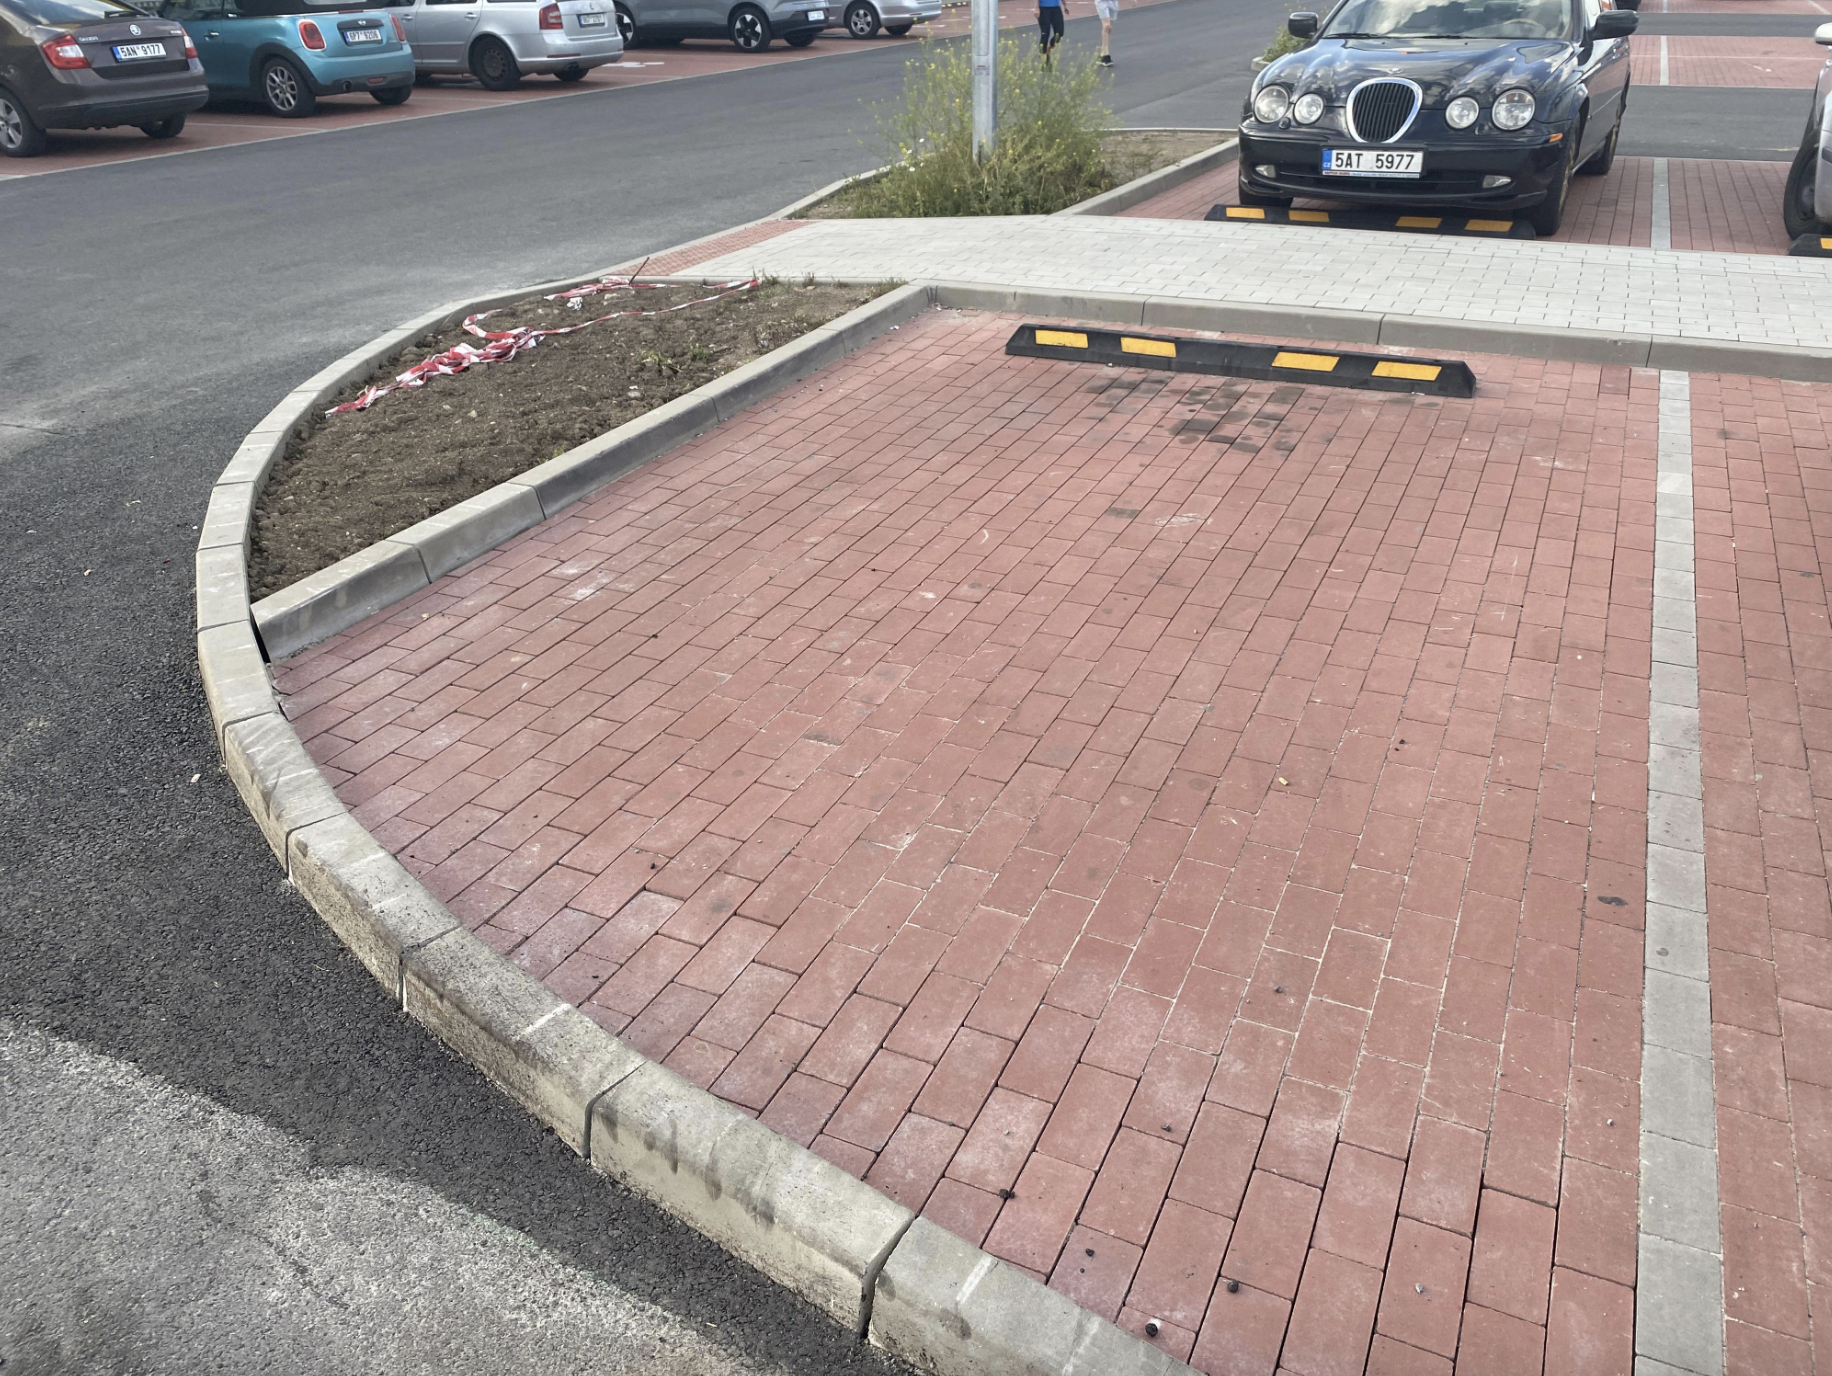 A photo of an empty, curved brick parking space near a street, with a black car parked in the adjacent space